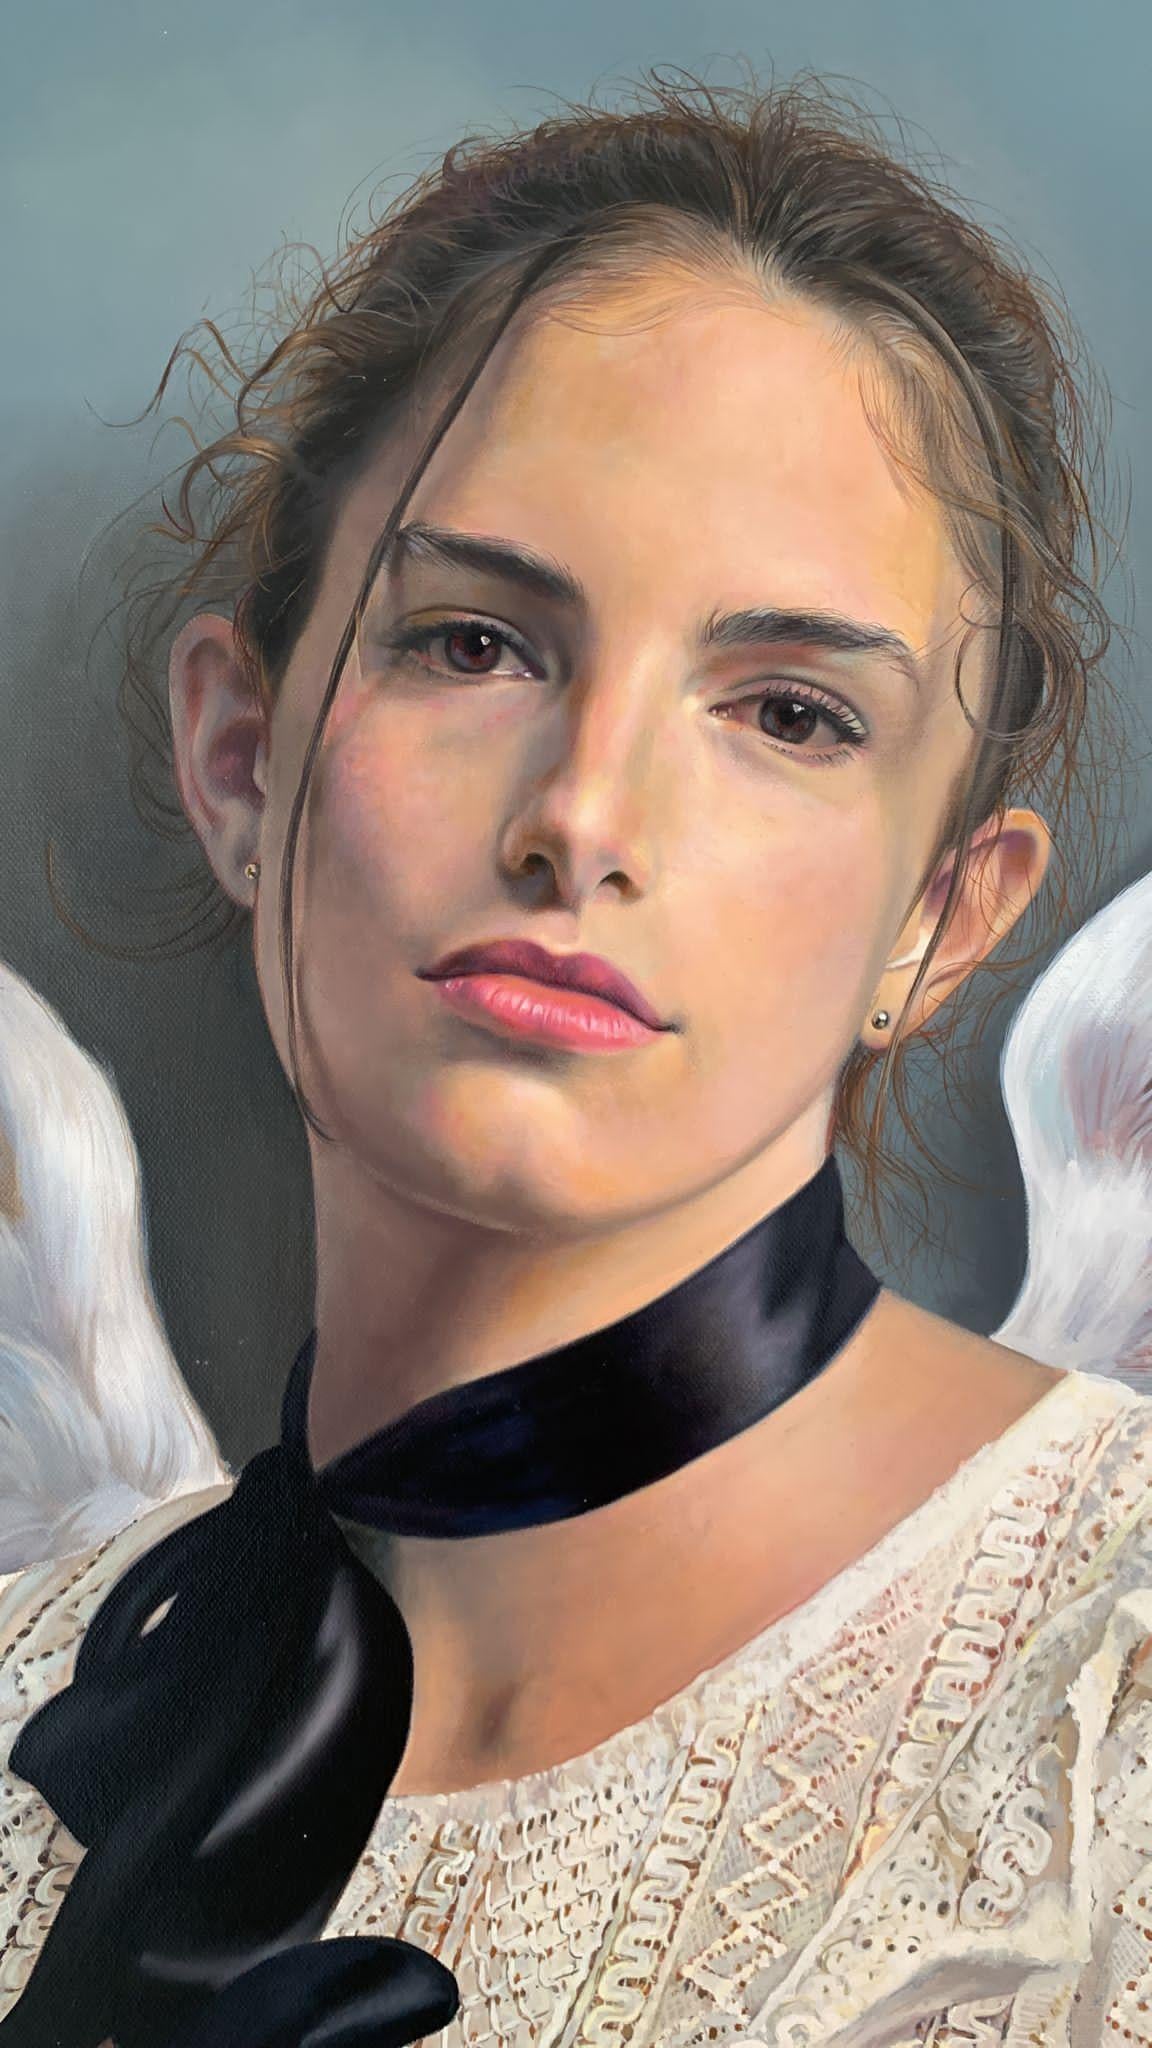 Fly away - Photorealistic portrait painting by Mauro Maugliani For Sale 2